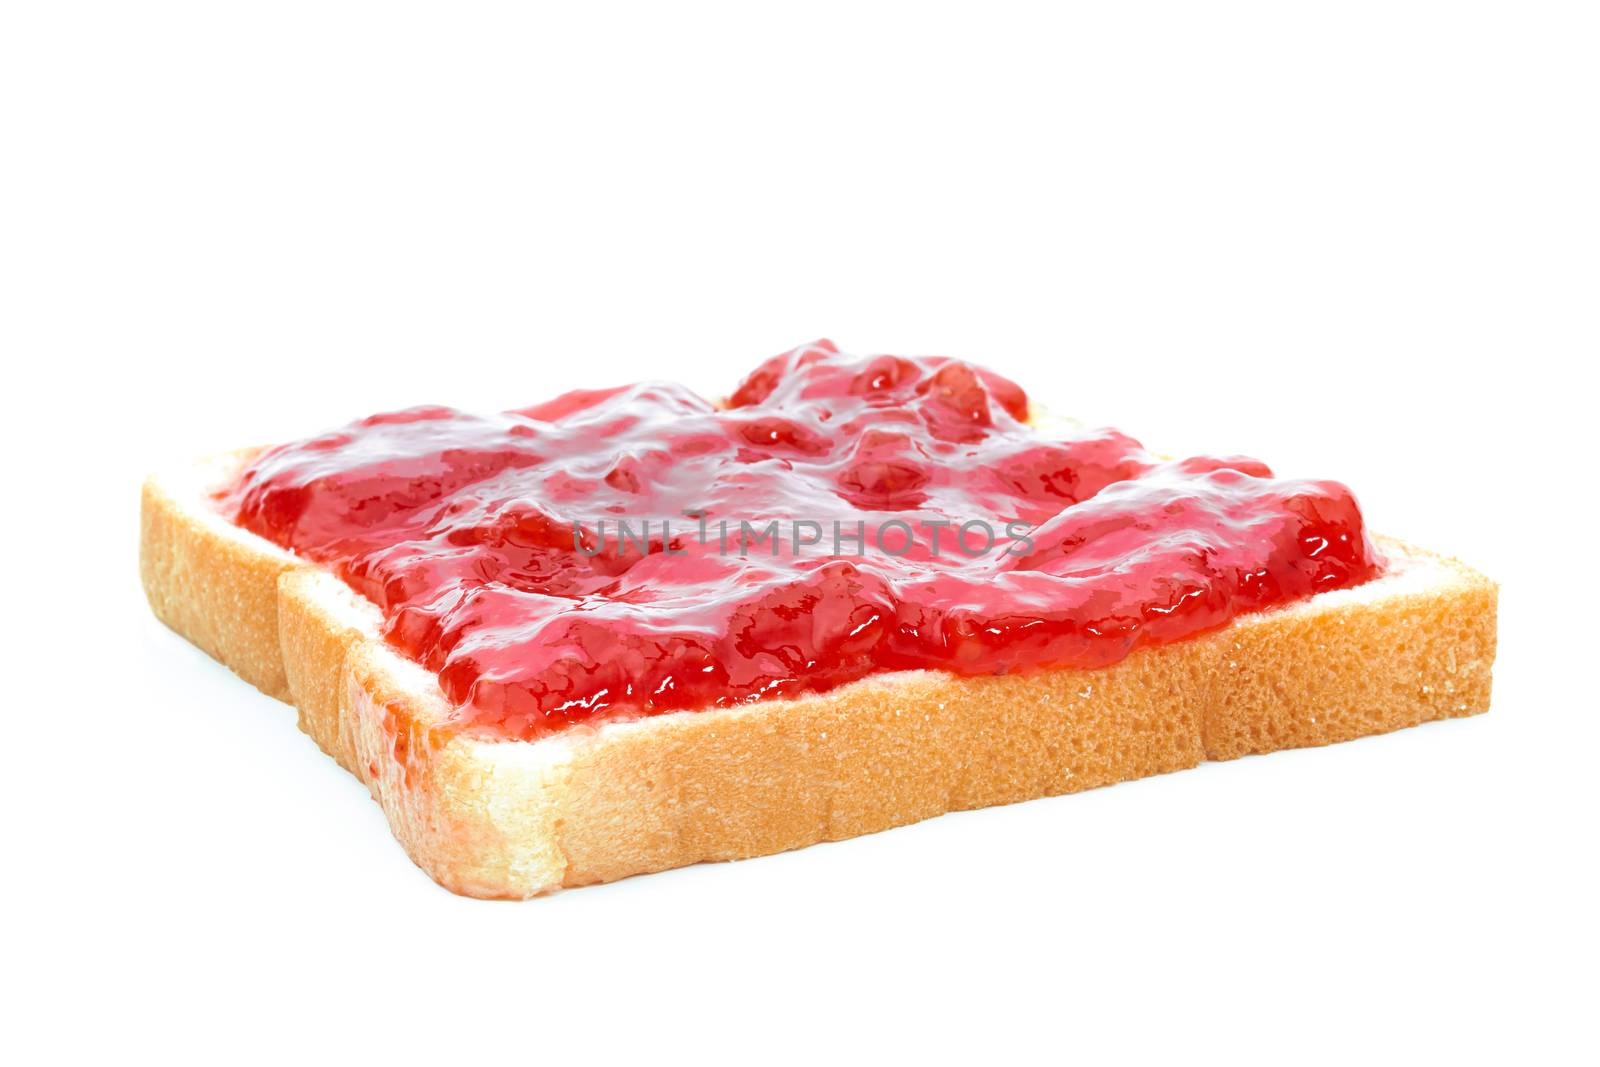 Strawberry jam bread on a white background